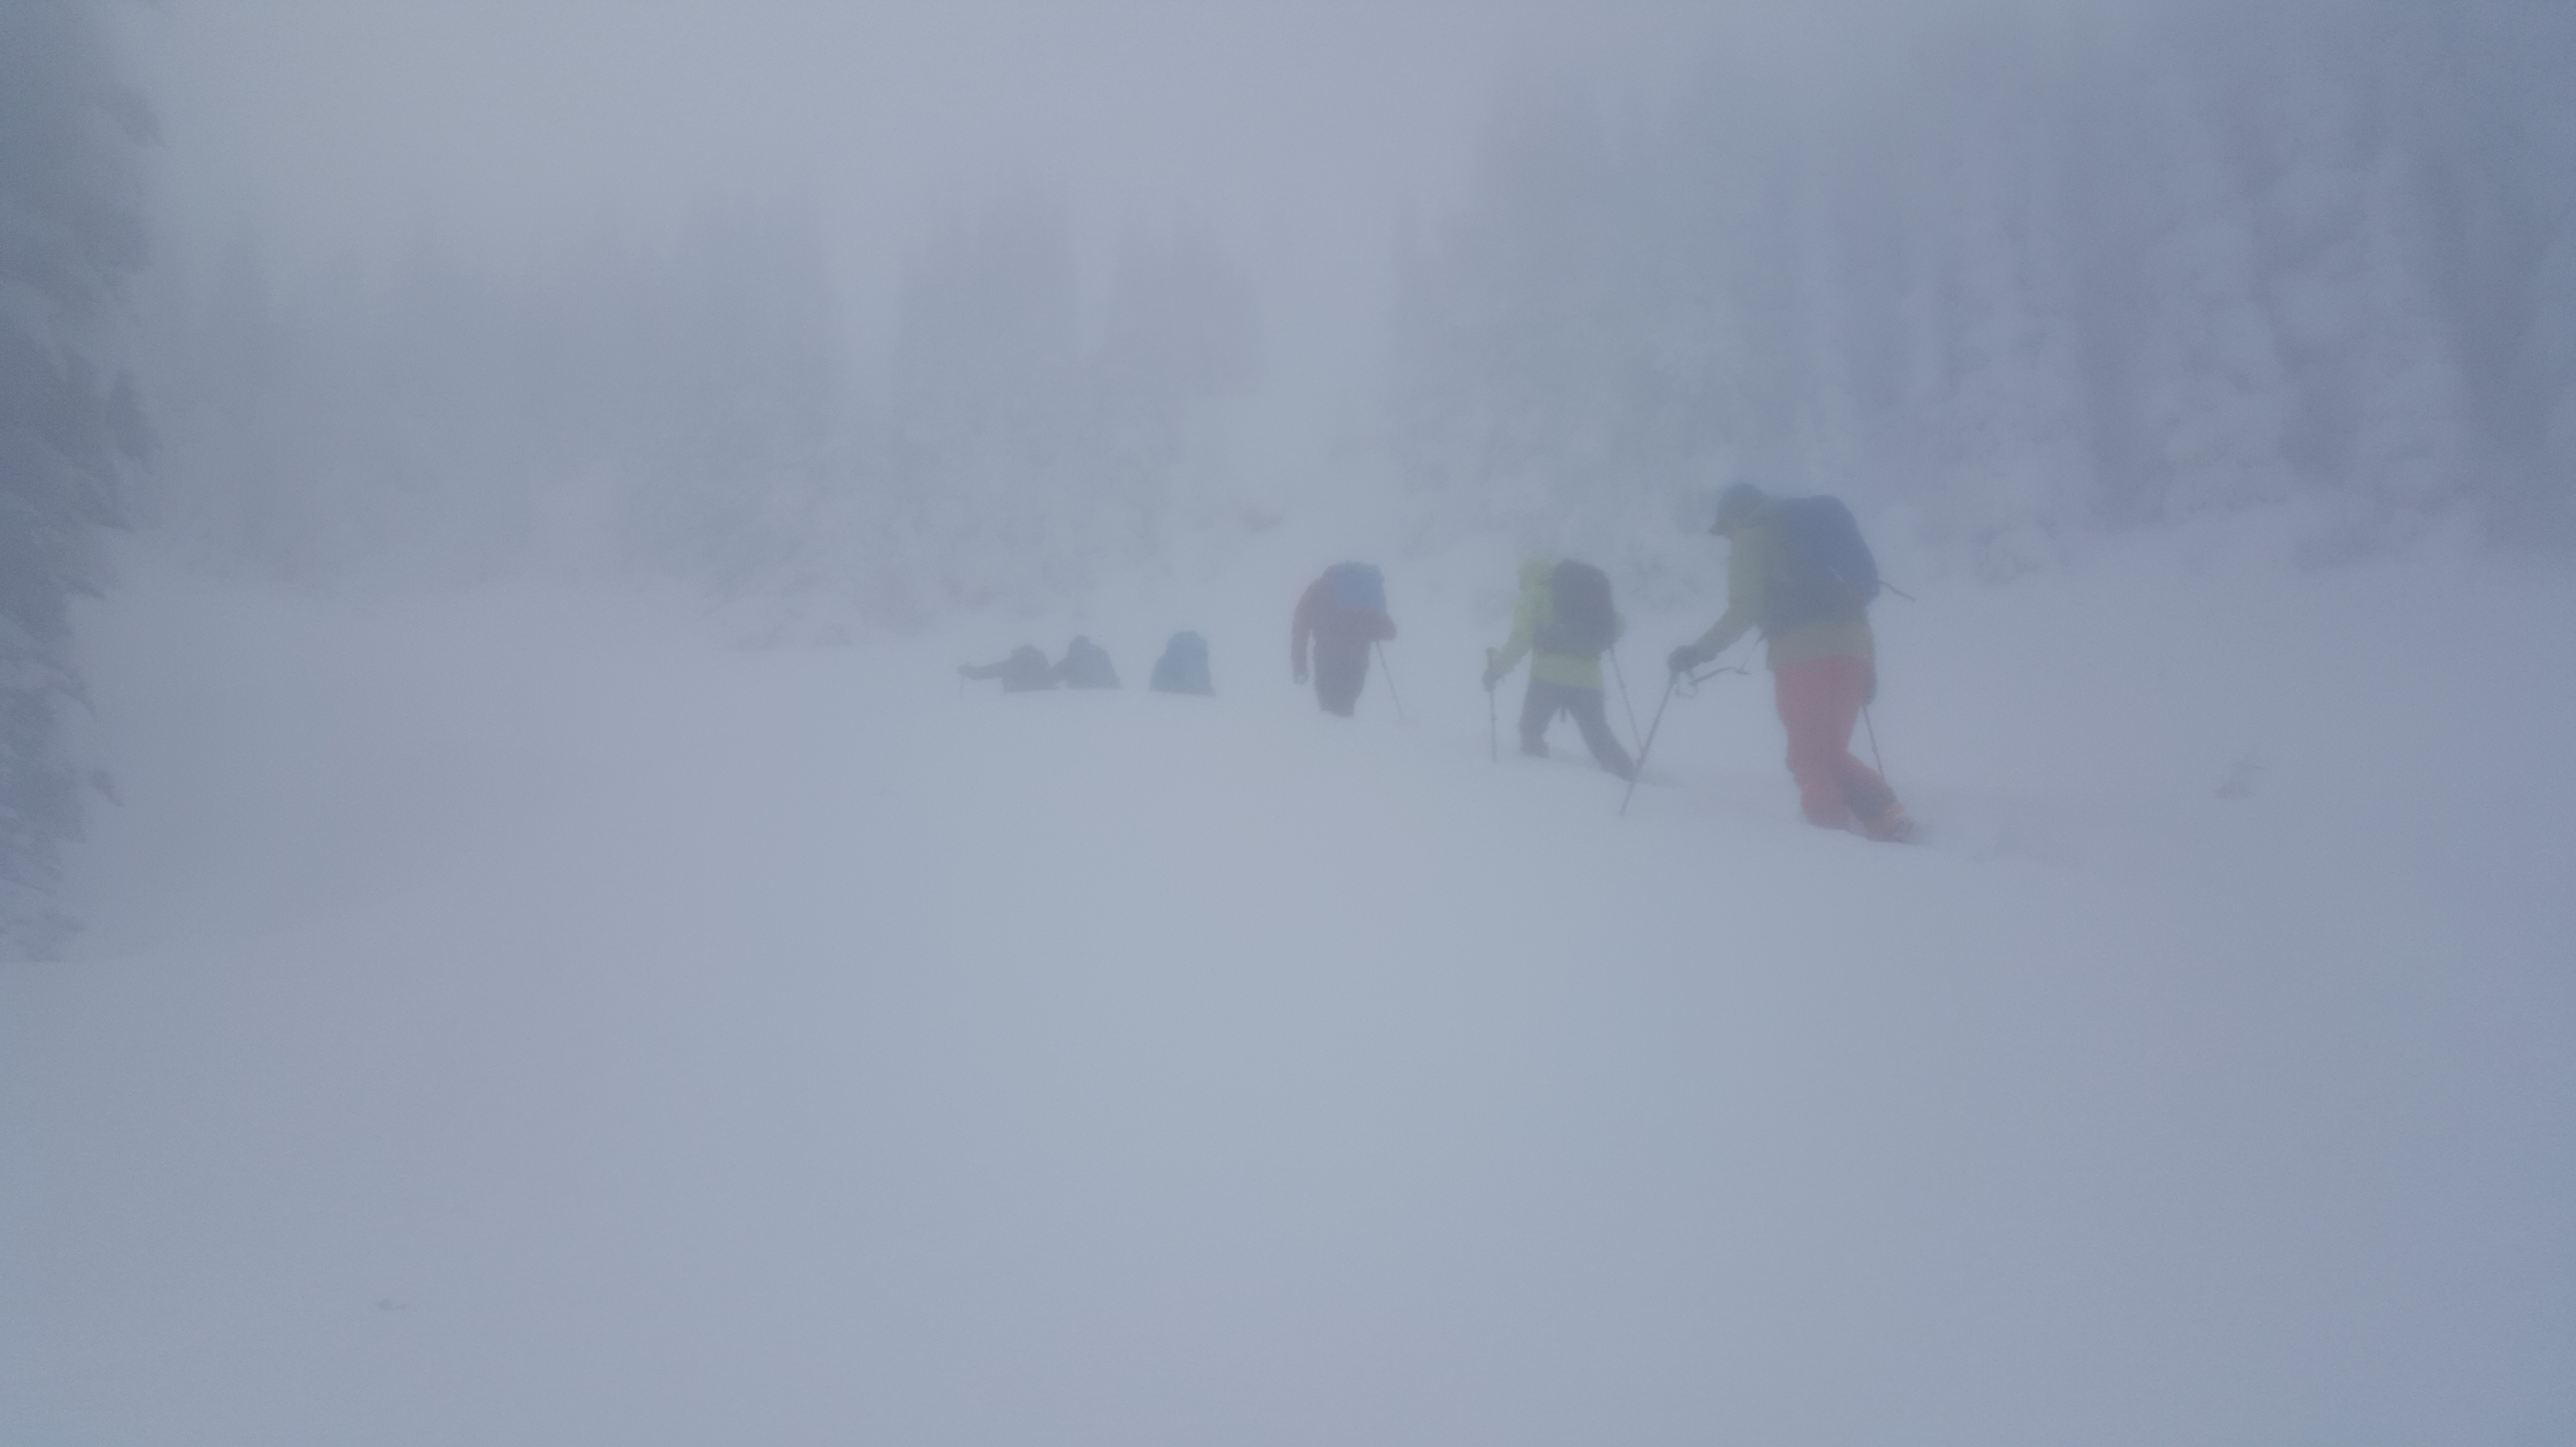 Skinning up the mountain. Image: Pro Guiding Service